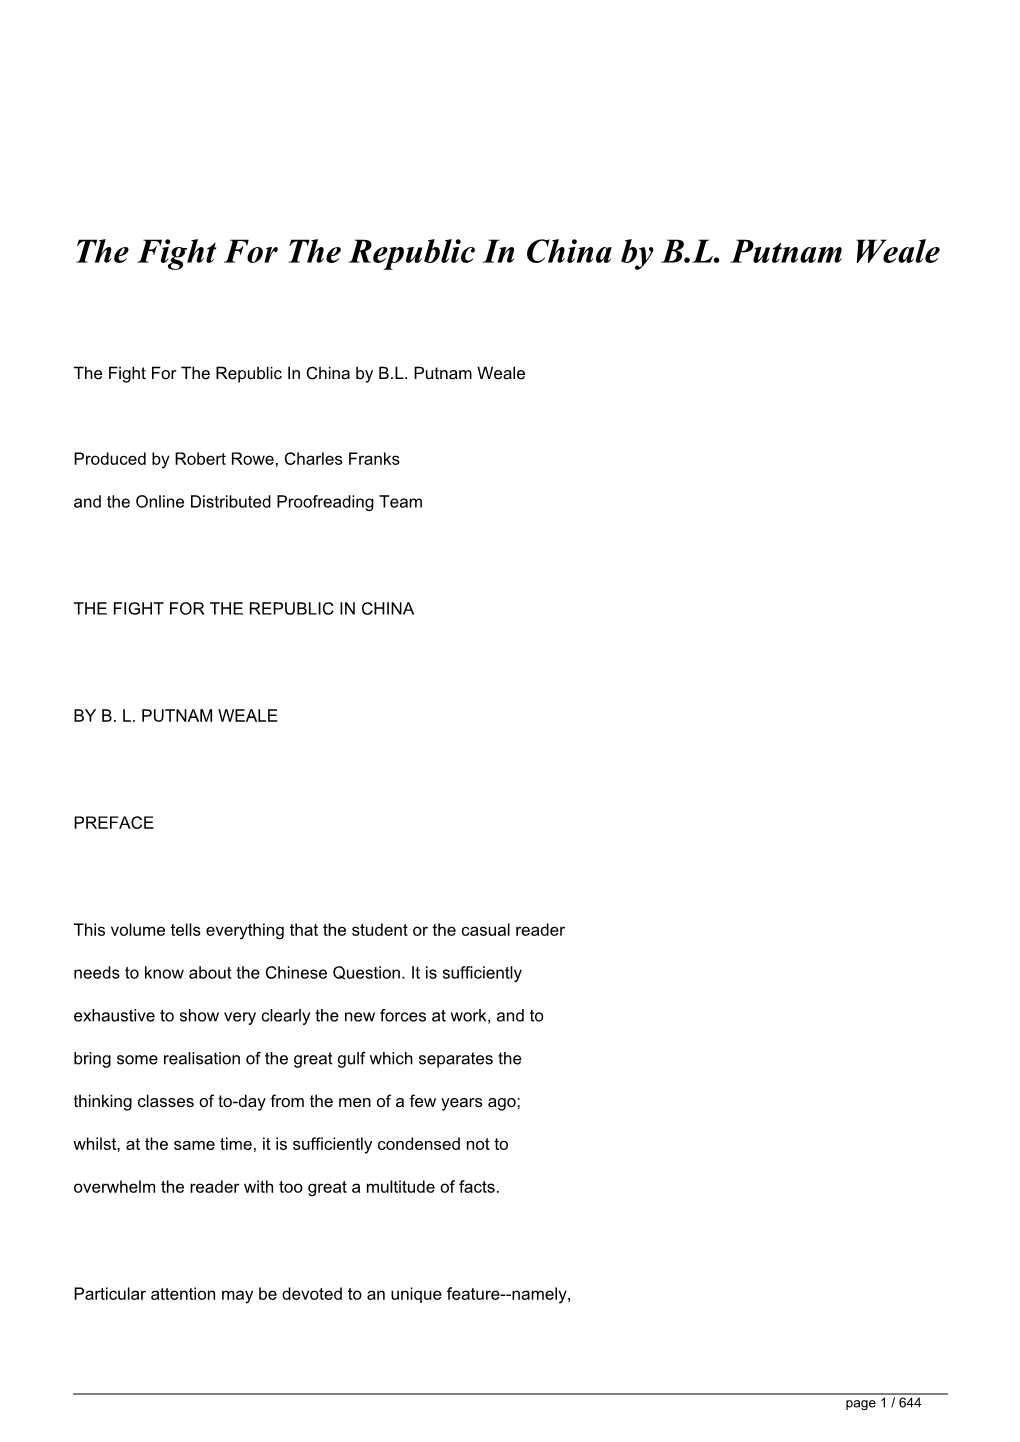 The Fight for the Republic in China by BL Putnam